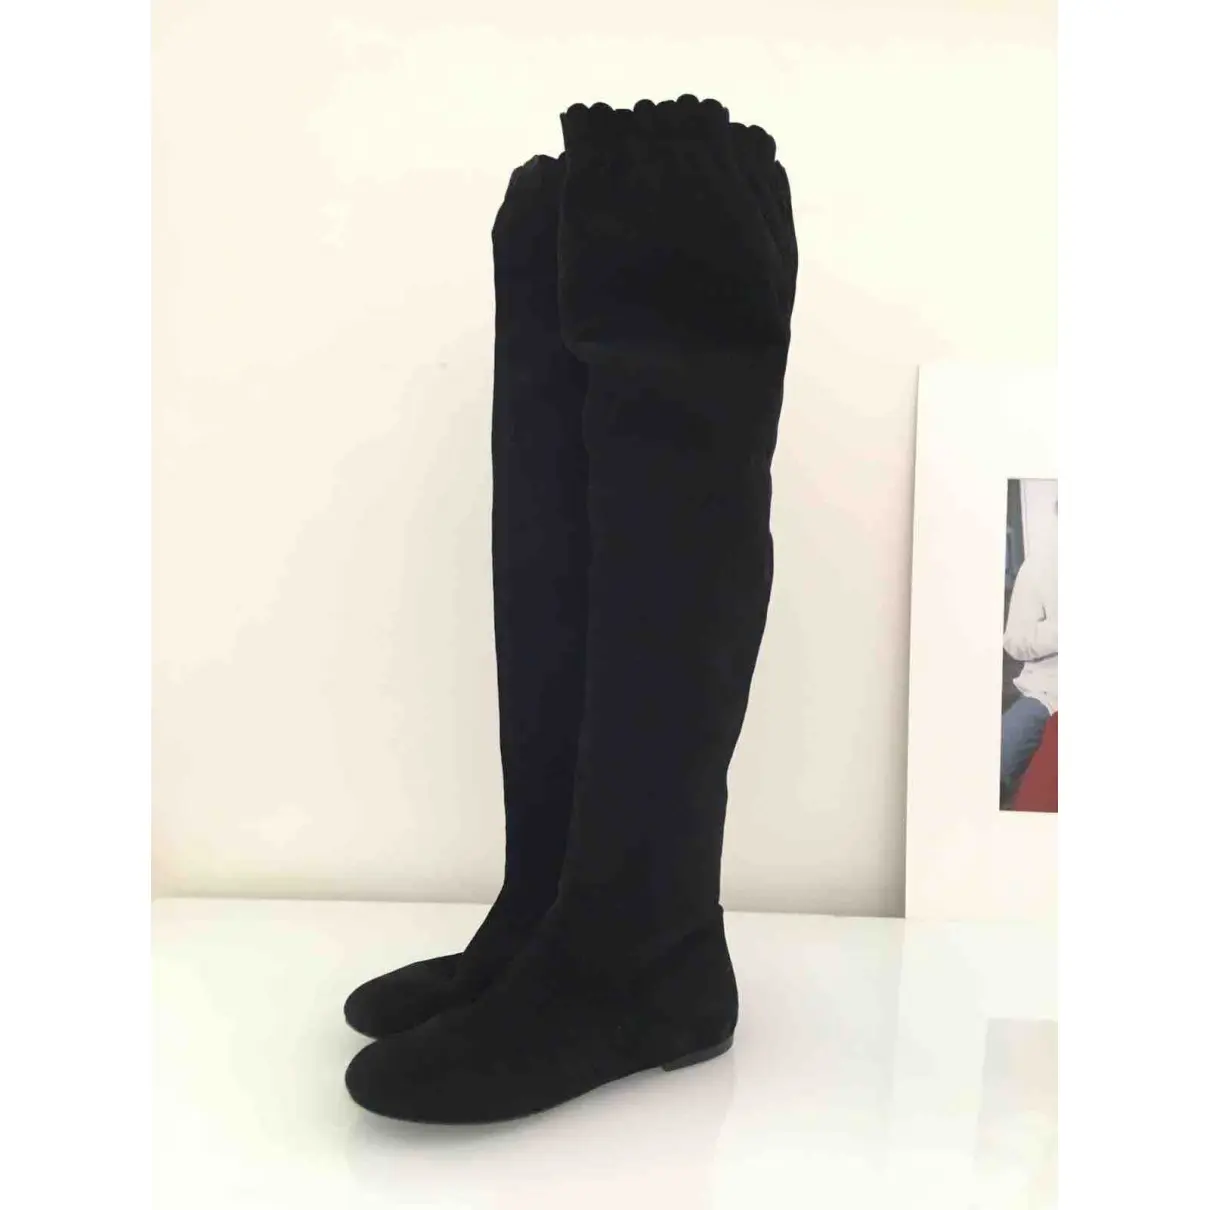 Marc by Marc Jacobs Riding boots for sale